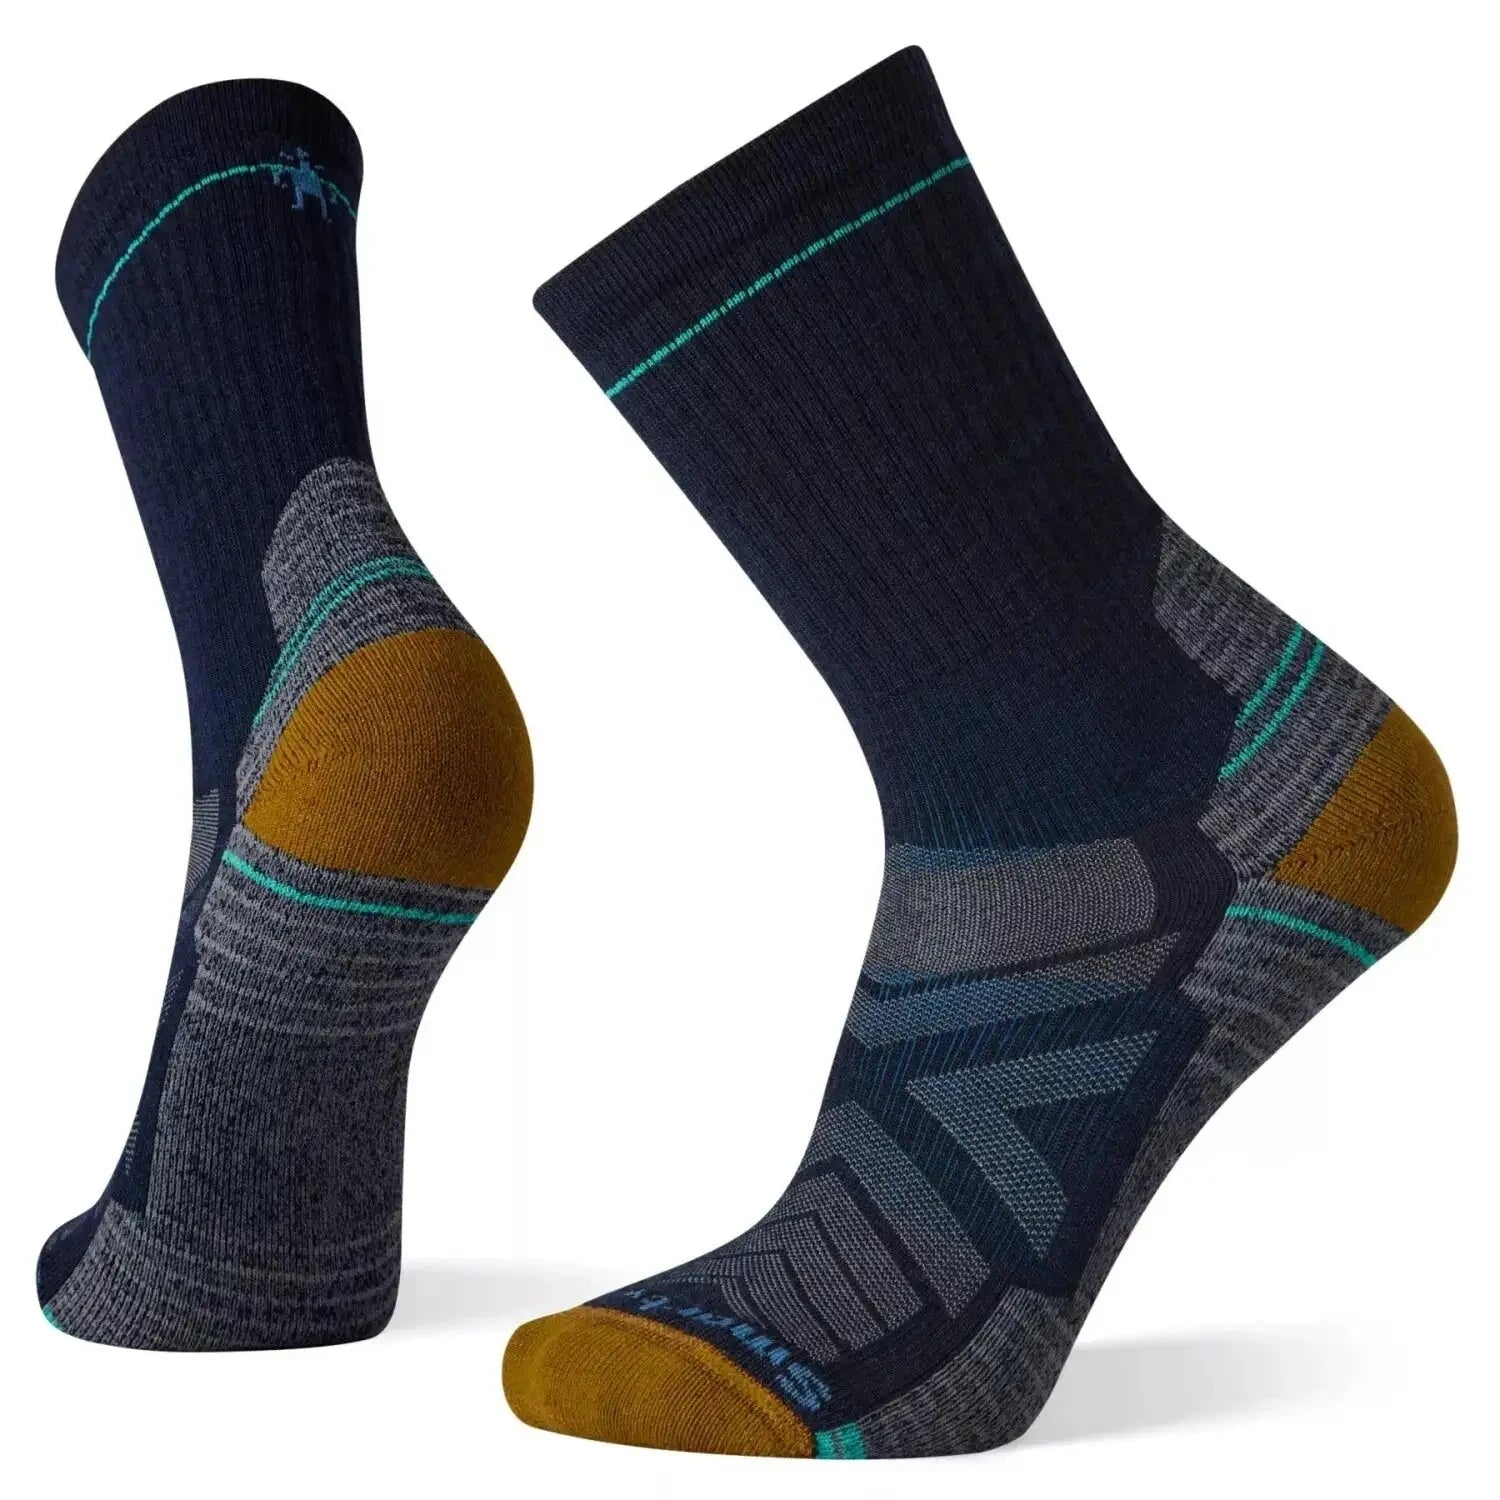 Smartwool Men's Hike Light Cushion Crew Socks shown in the Deep Navy color option.